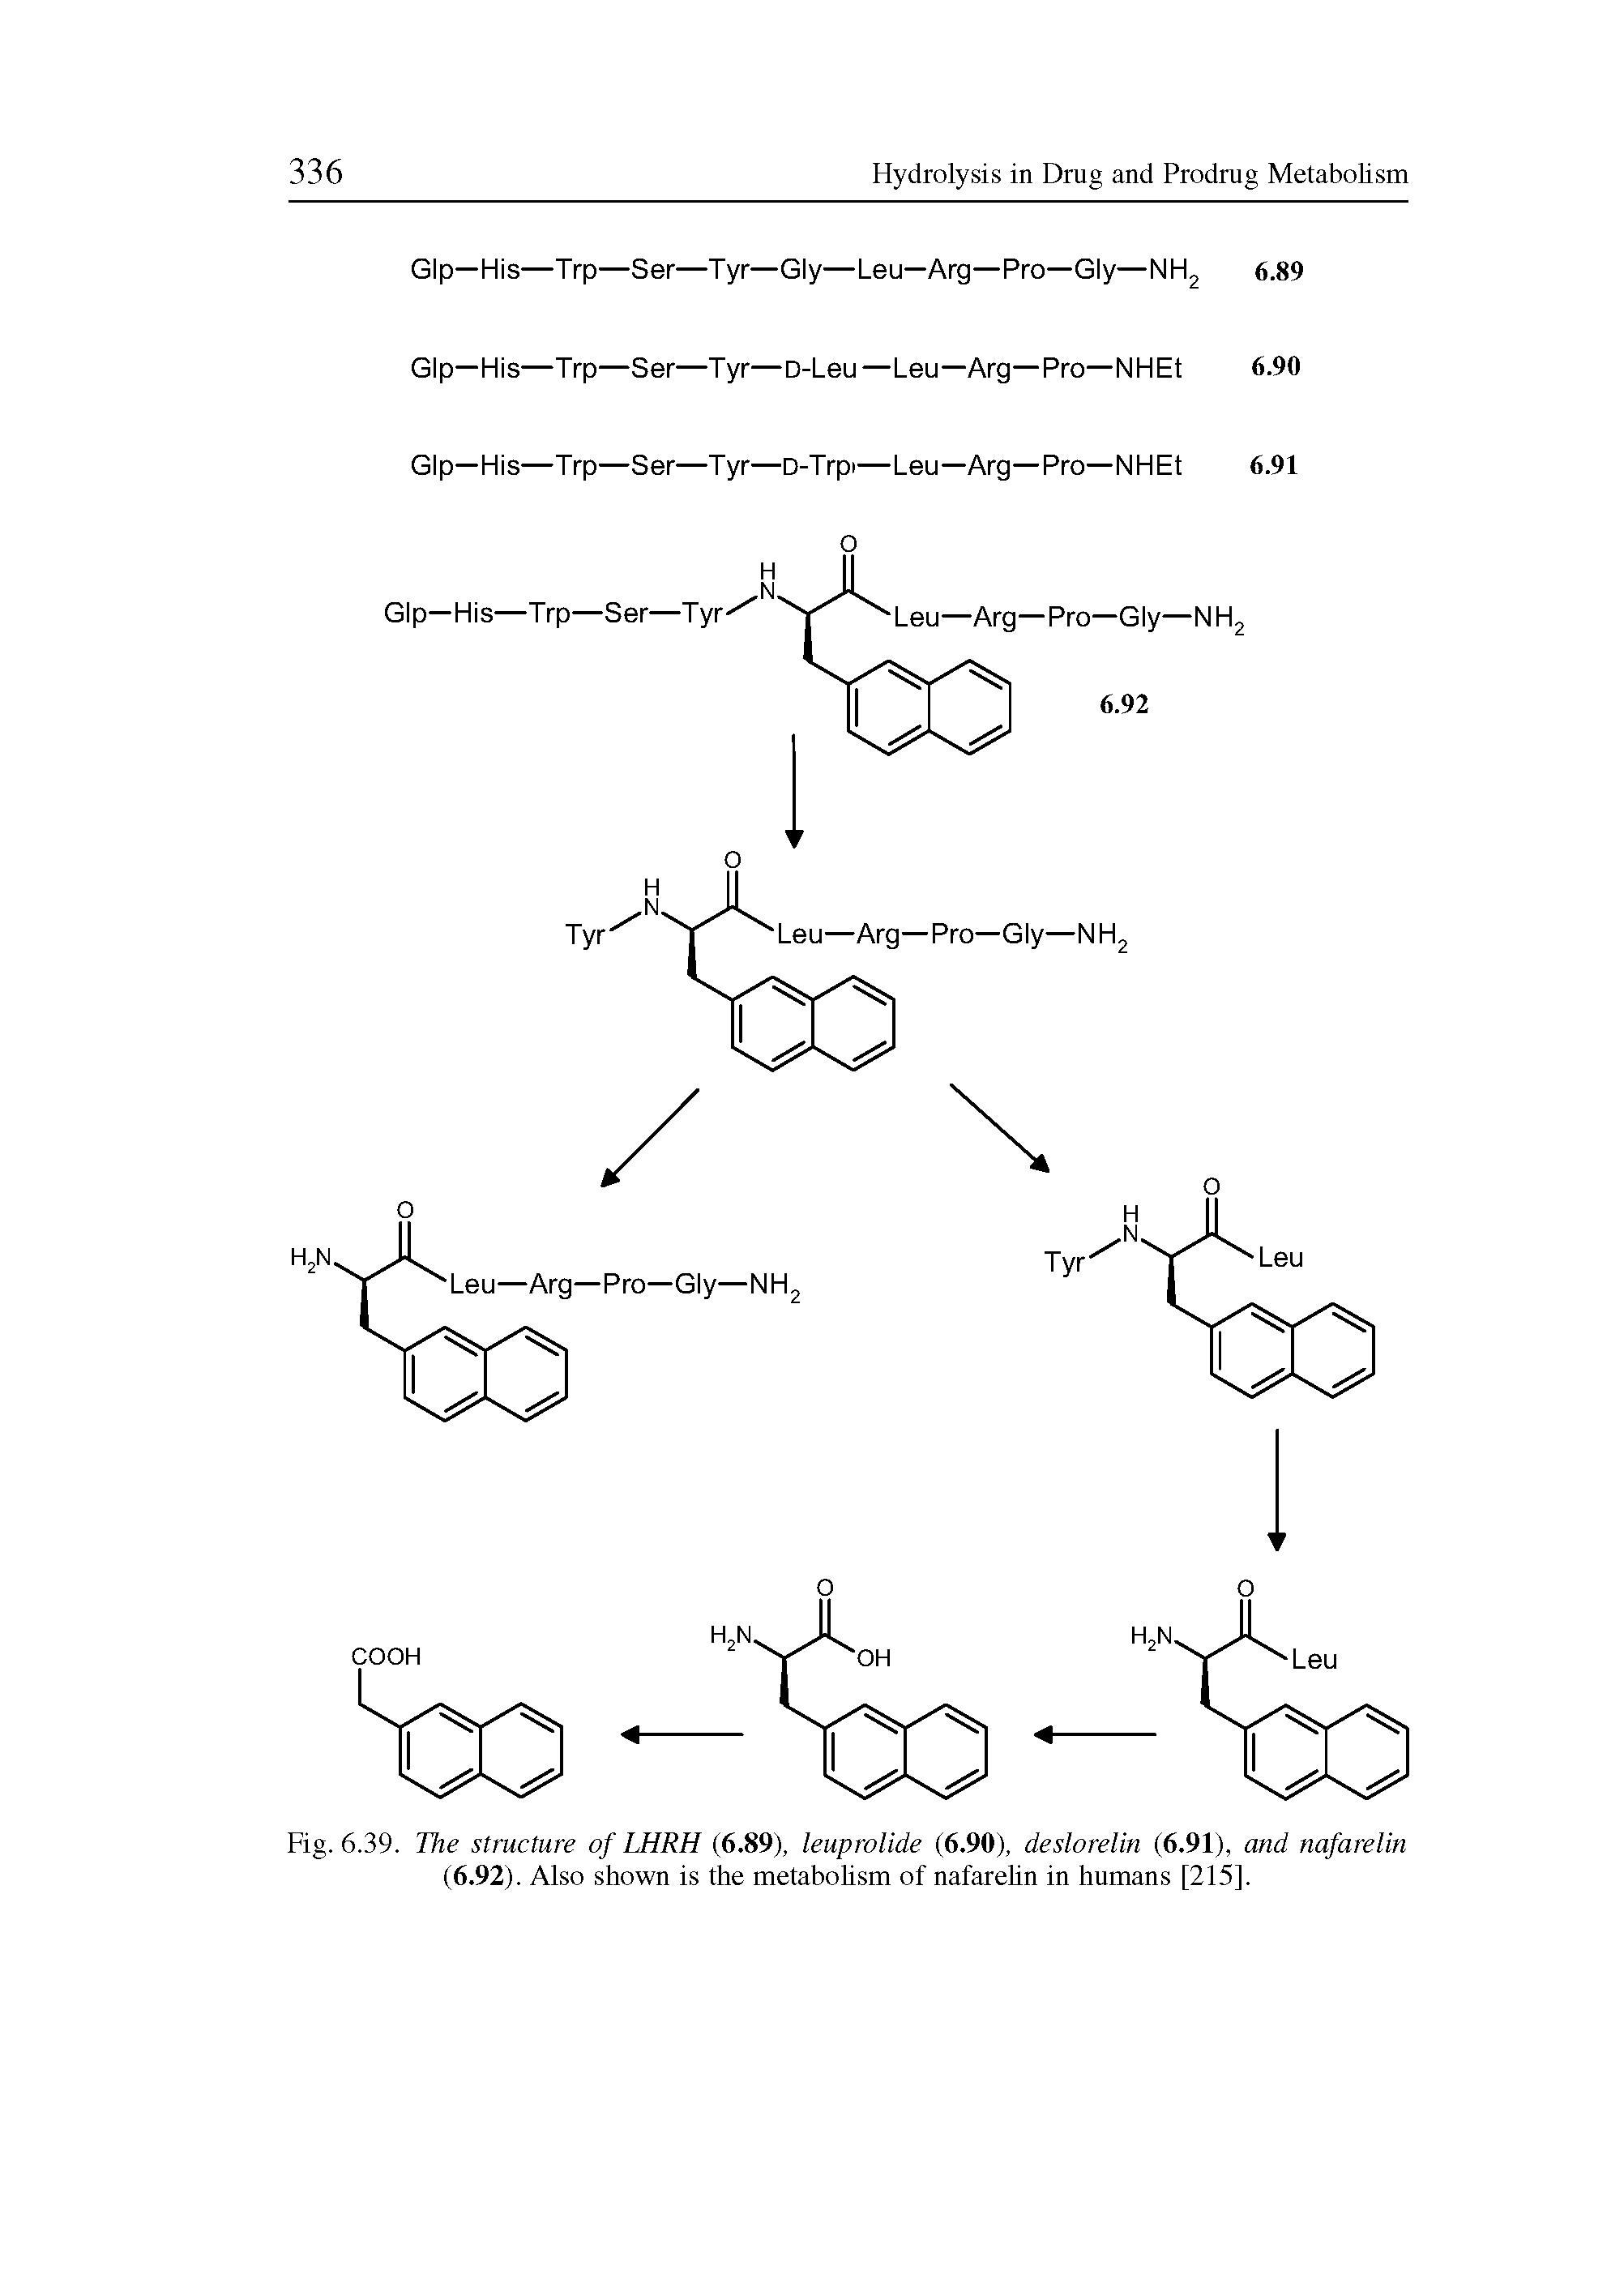 Fig. 6.39. The structure of LHRH (6.89), leuprolide (6.90), deslorelin (6.91), and nafarelin (6.92). Also shown is the metabolism of nafarelin in humans [215].